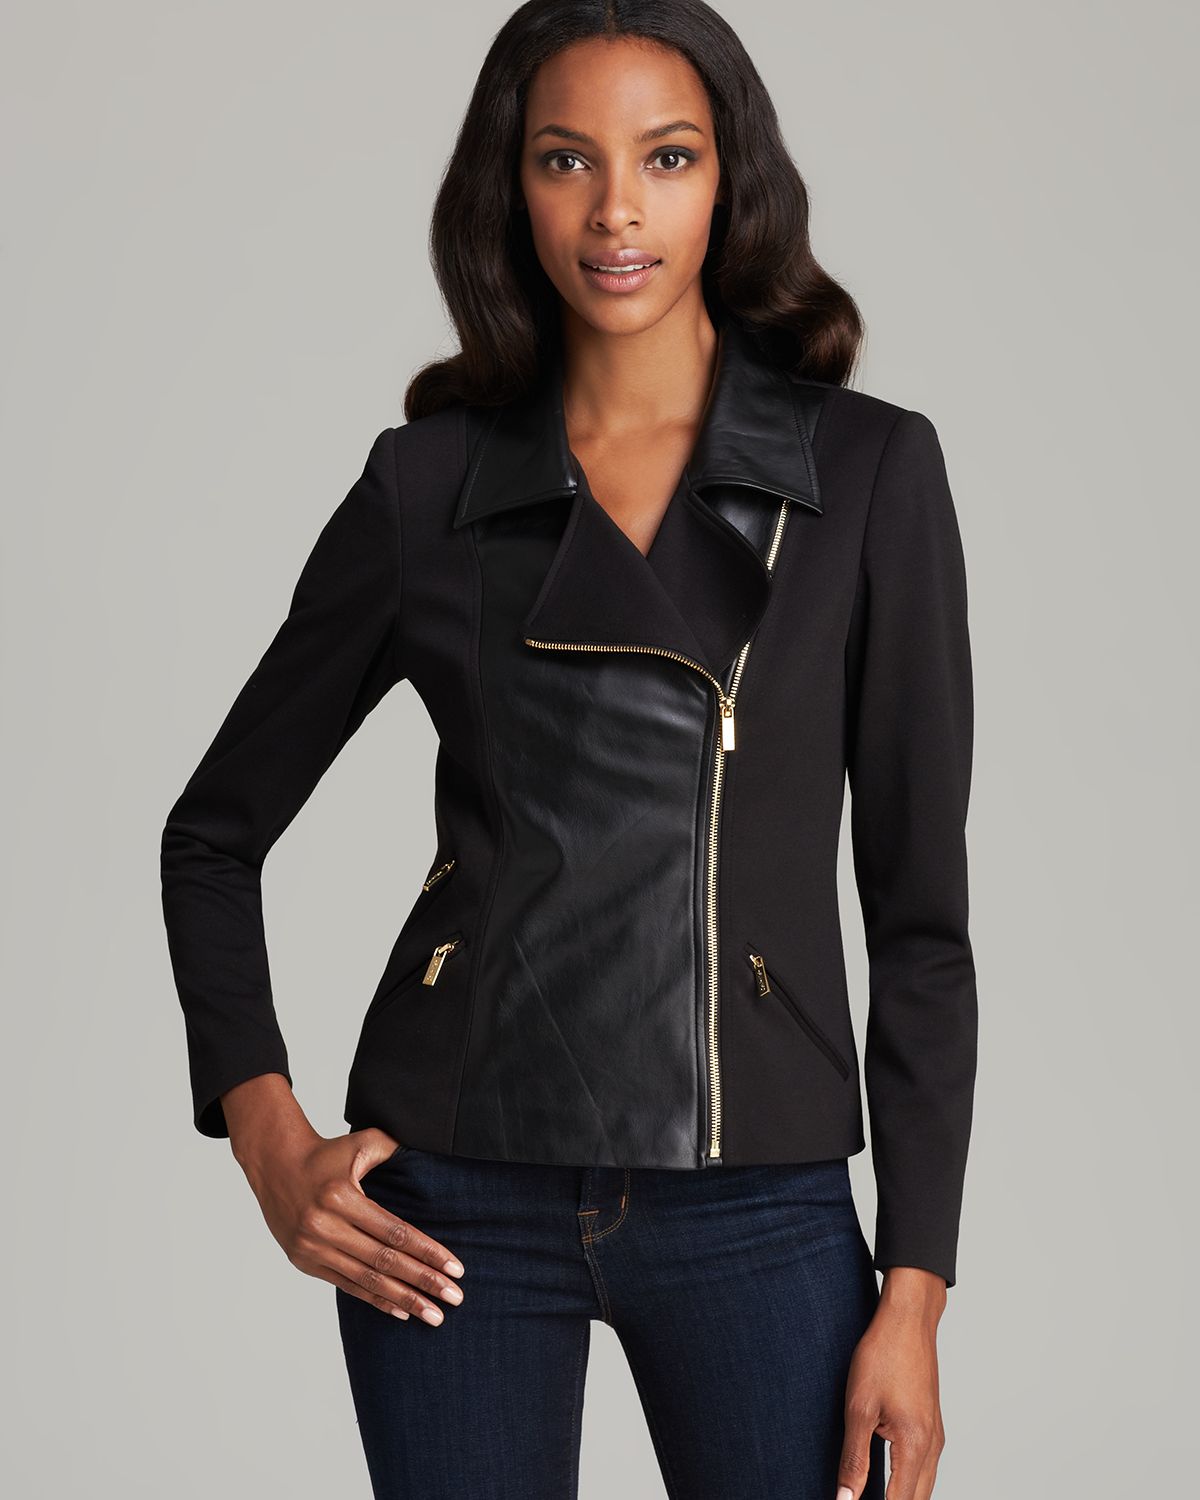 Lyst - Calvin Klein Faux Leather Front Jacket in Black